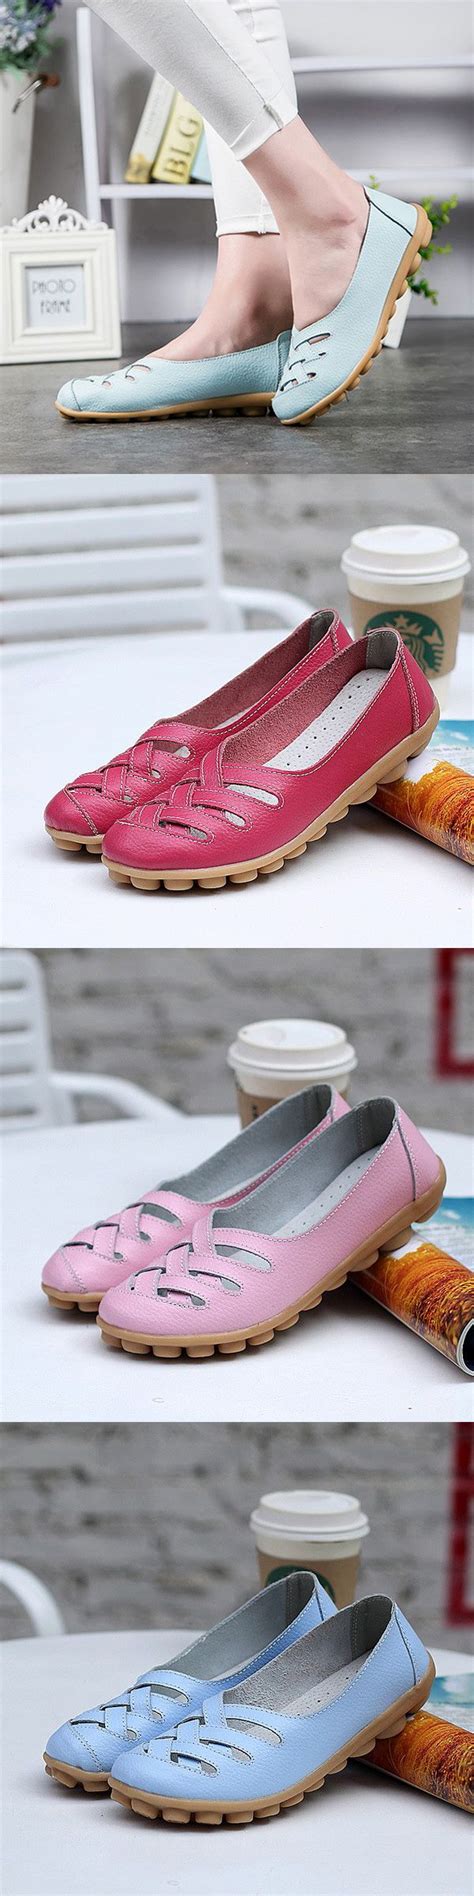 Big Size Soft Breathable Comfy Slip On Hollow Out Flat Shoes Flats